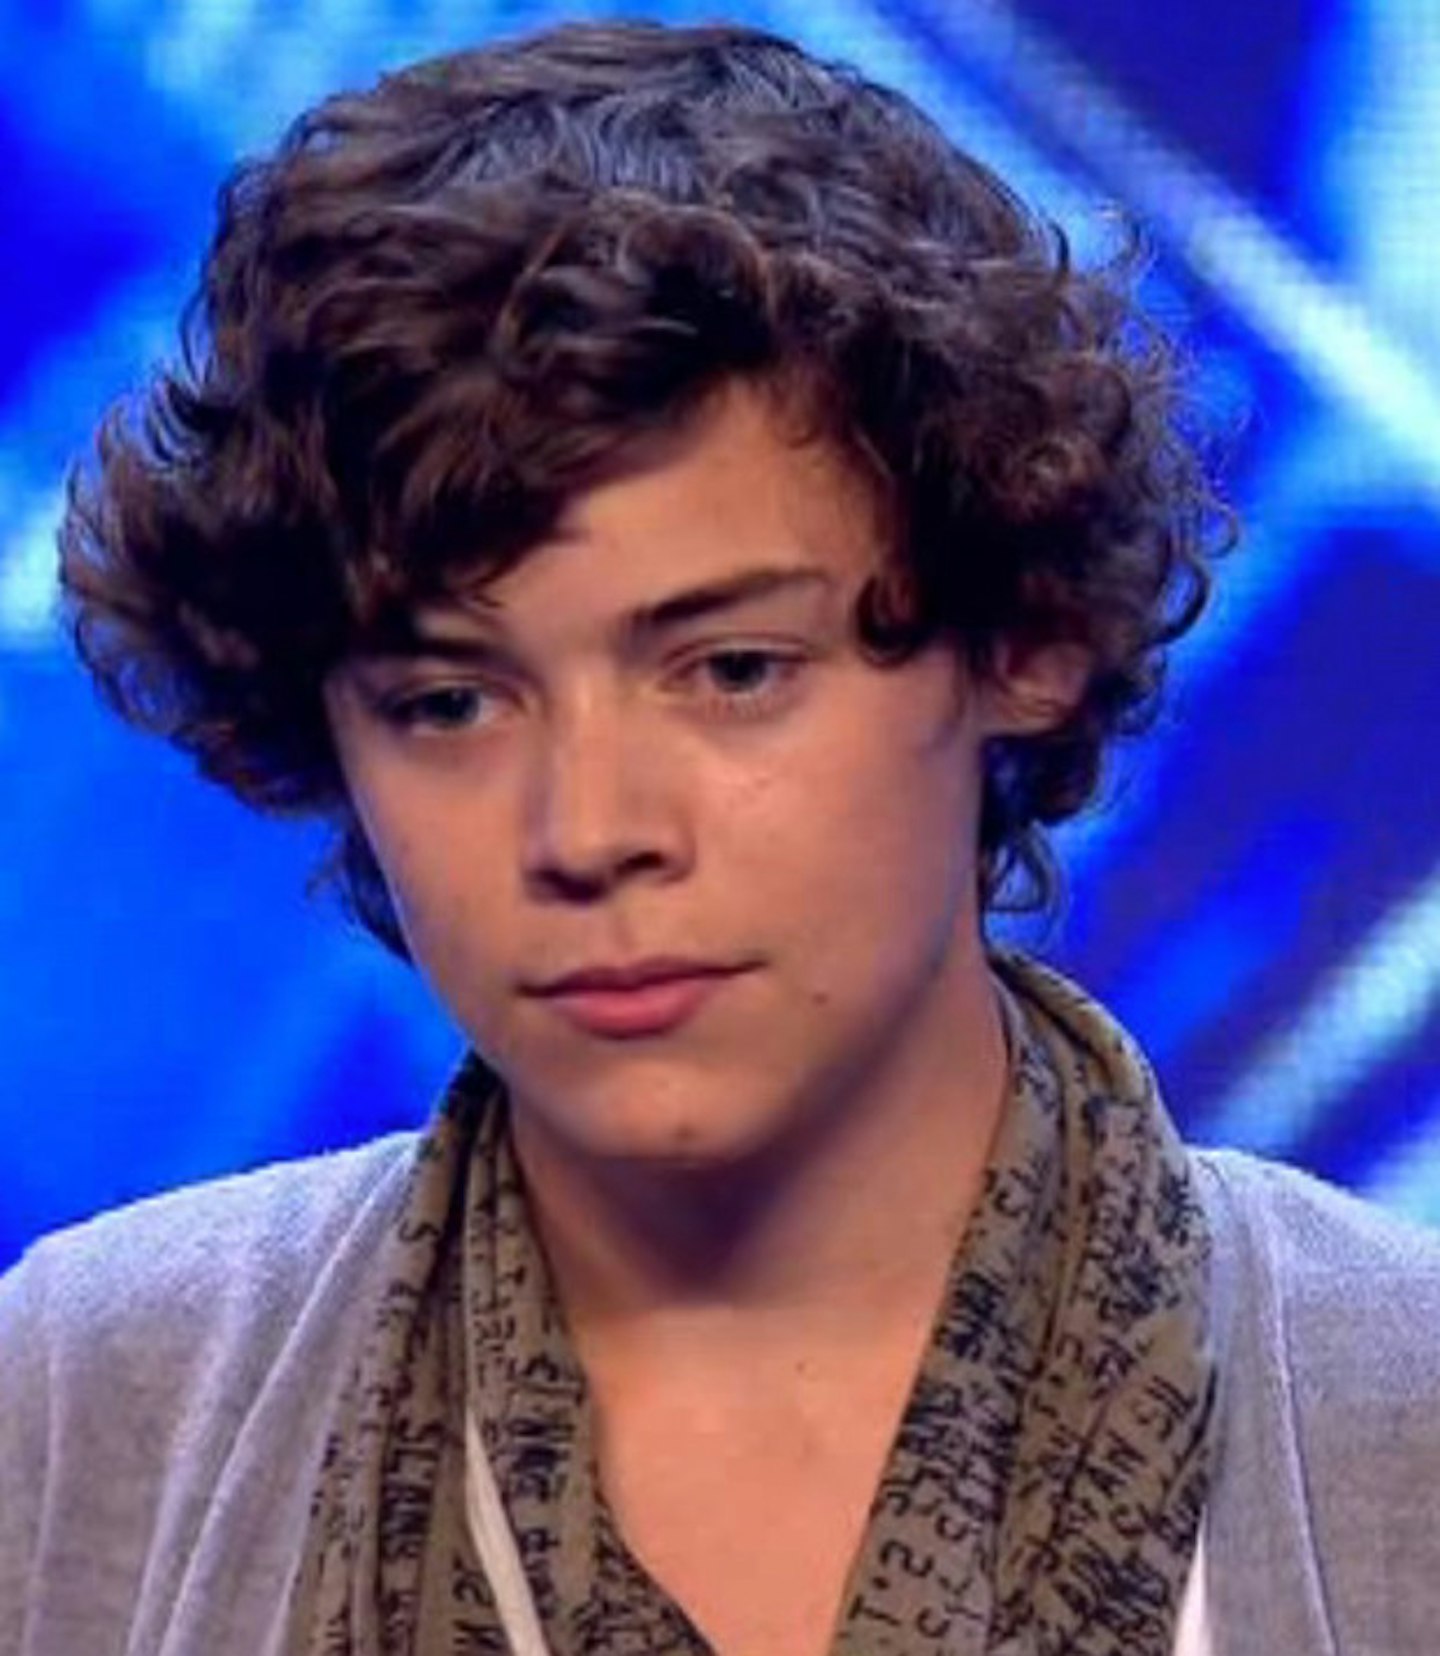 harry-styles-x-factor-audition